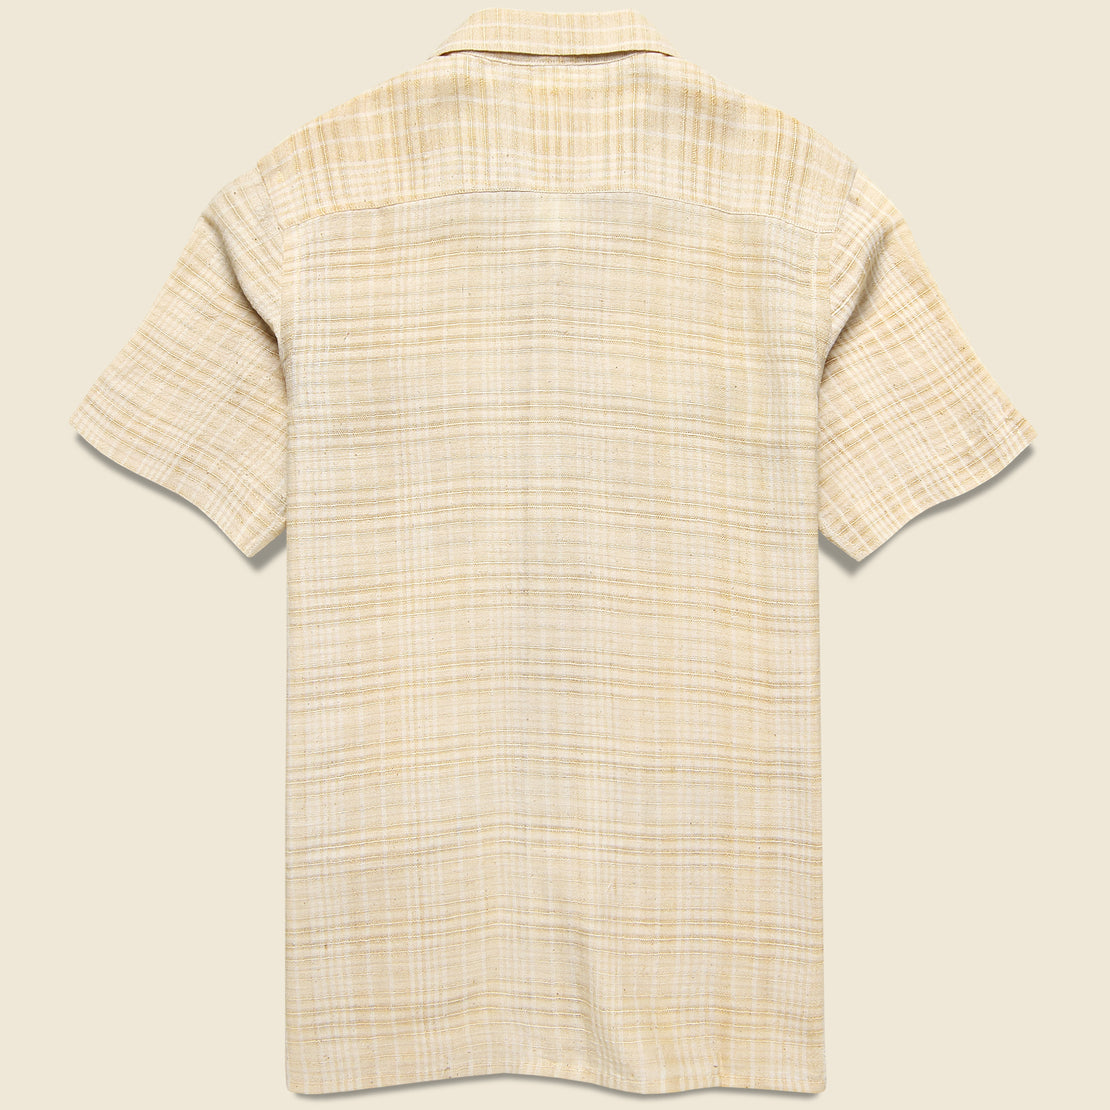 Alfred Handwoven Cross Hatch Shirt - Off White - Kardo - STAG Provisions - Tops - S/S Woven - Solid